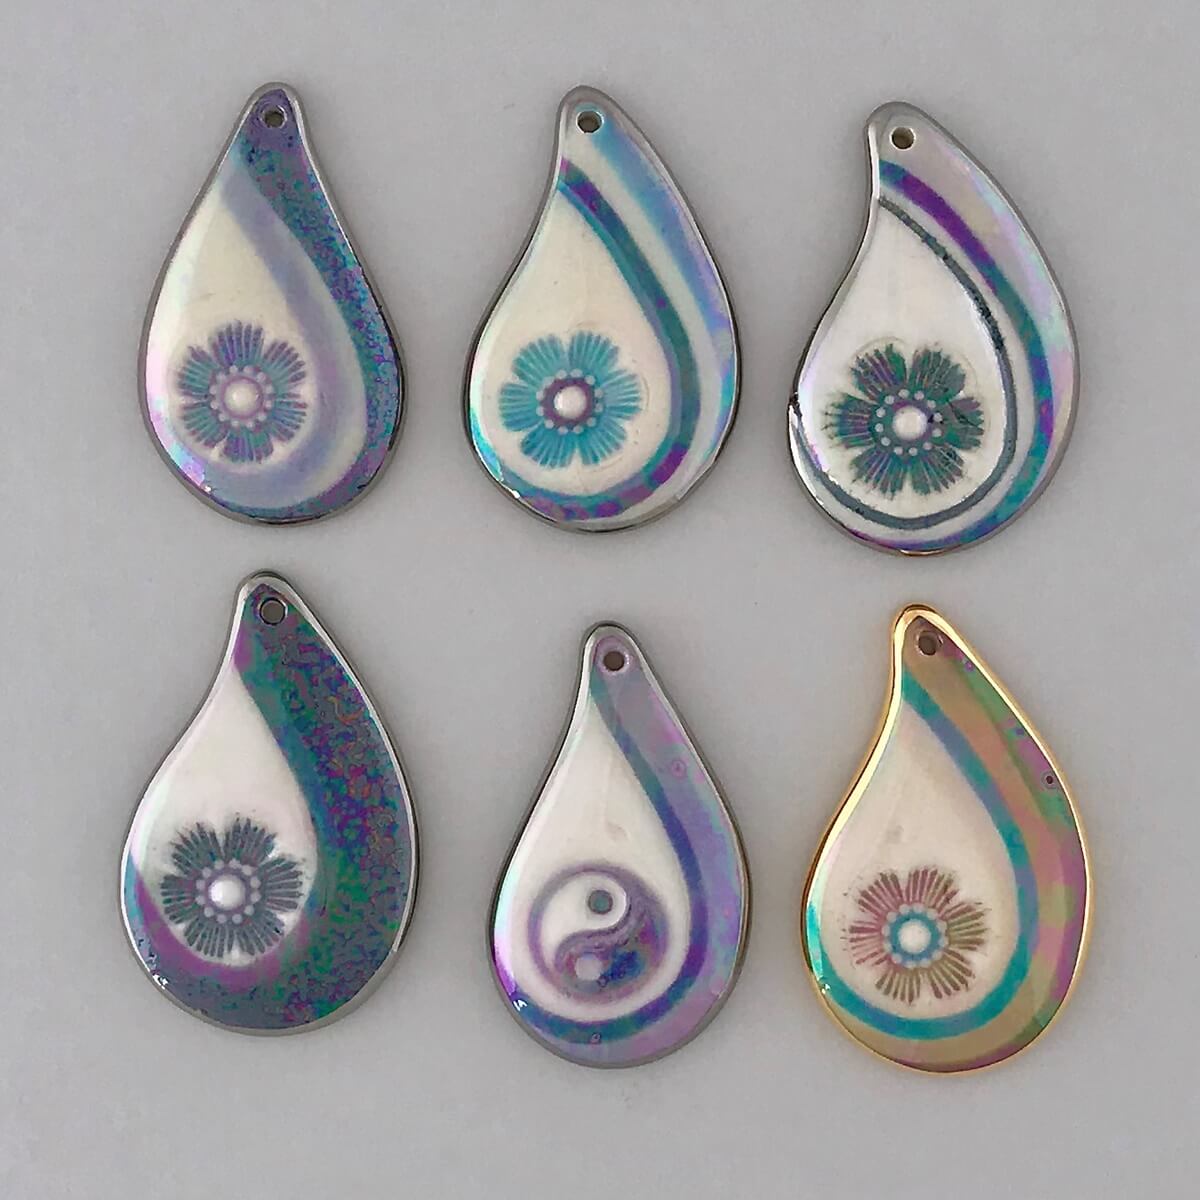 Handpainted teardrop pendants with pictorial accents.